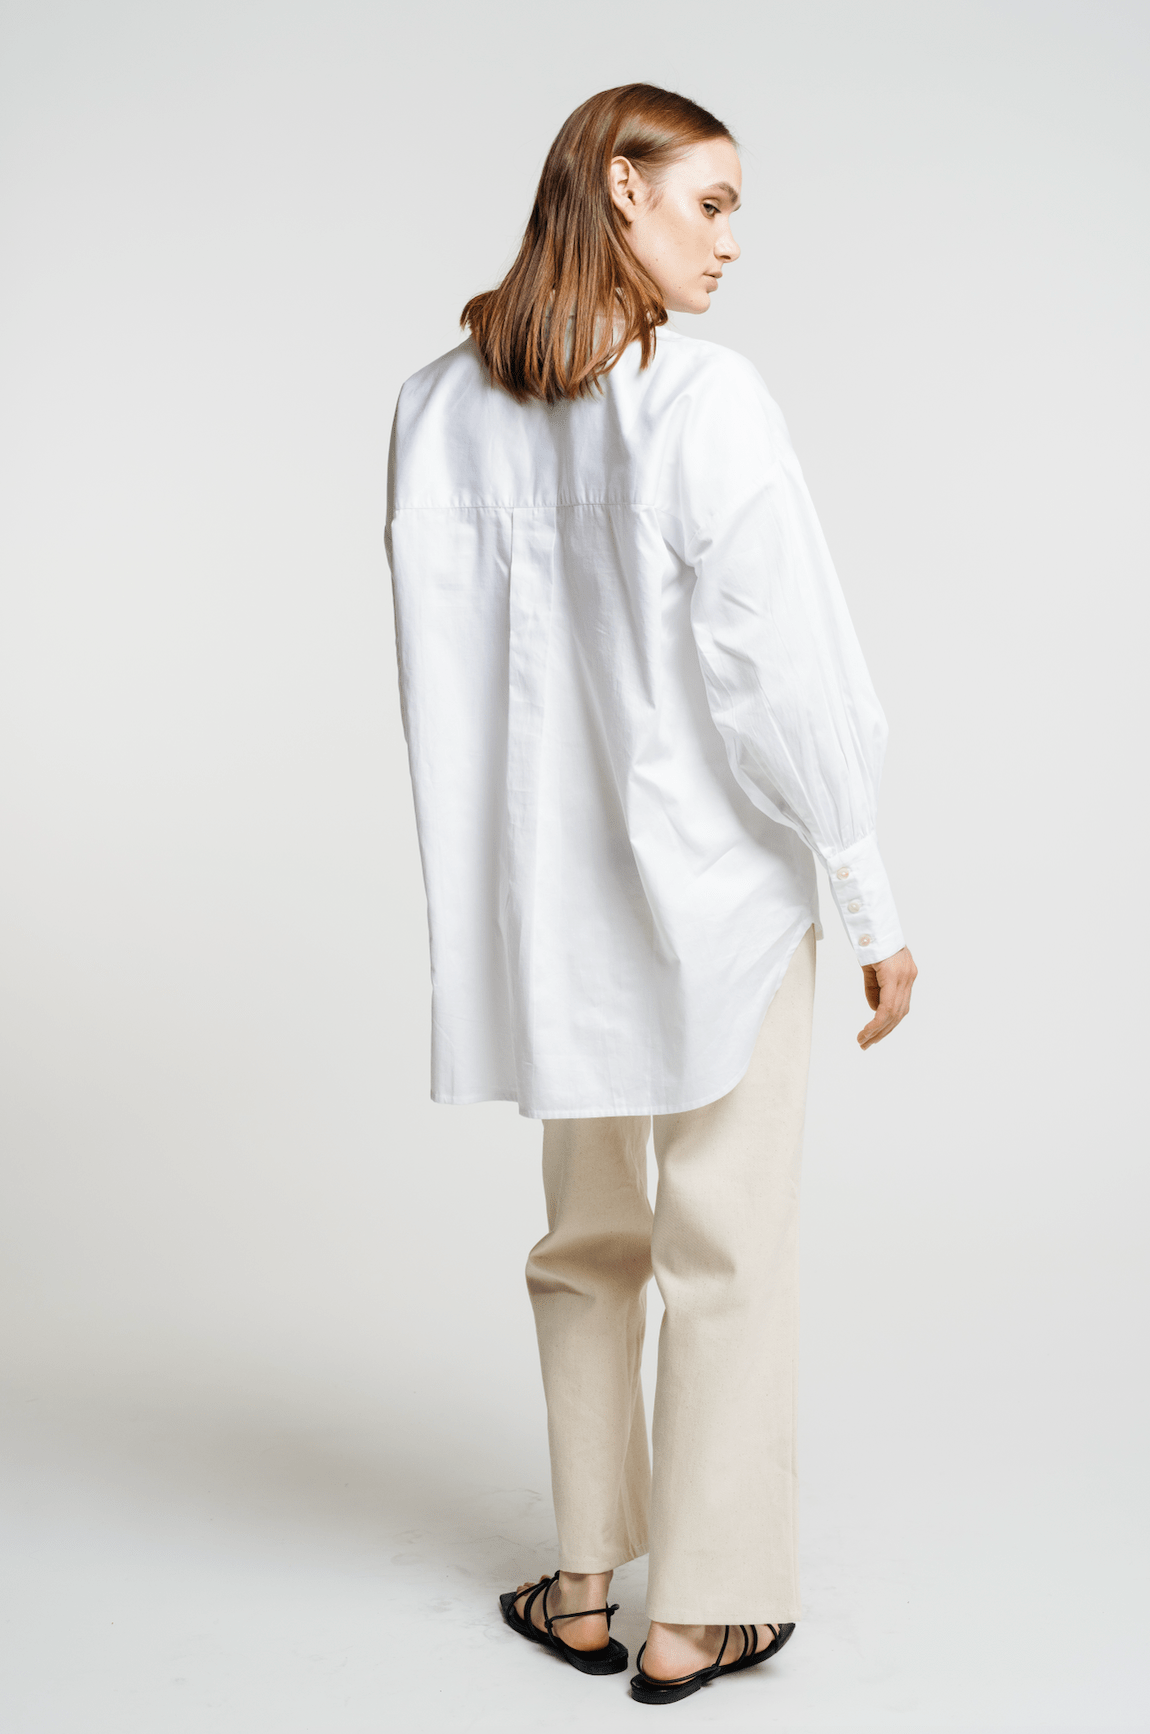 The back view of a woman wearing an Oversized Button Up - White, featuring an organic cotton poplin white shirt and beige pants.